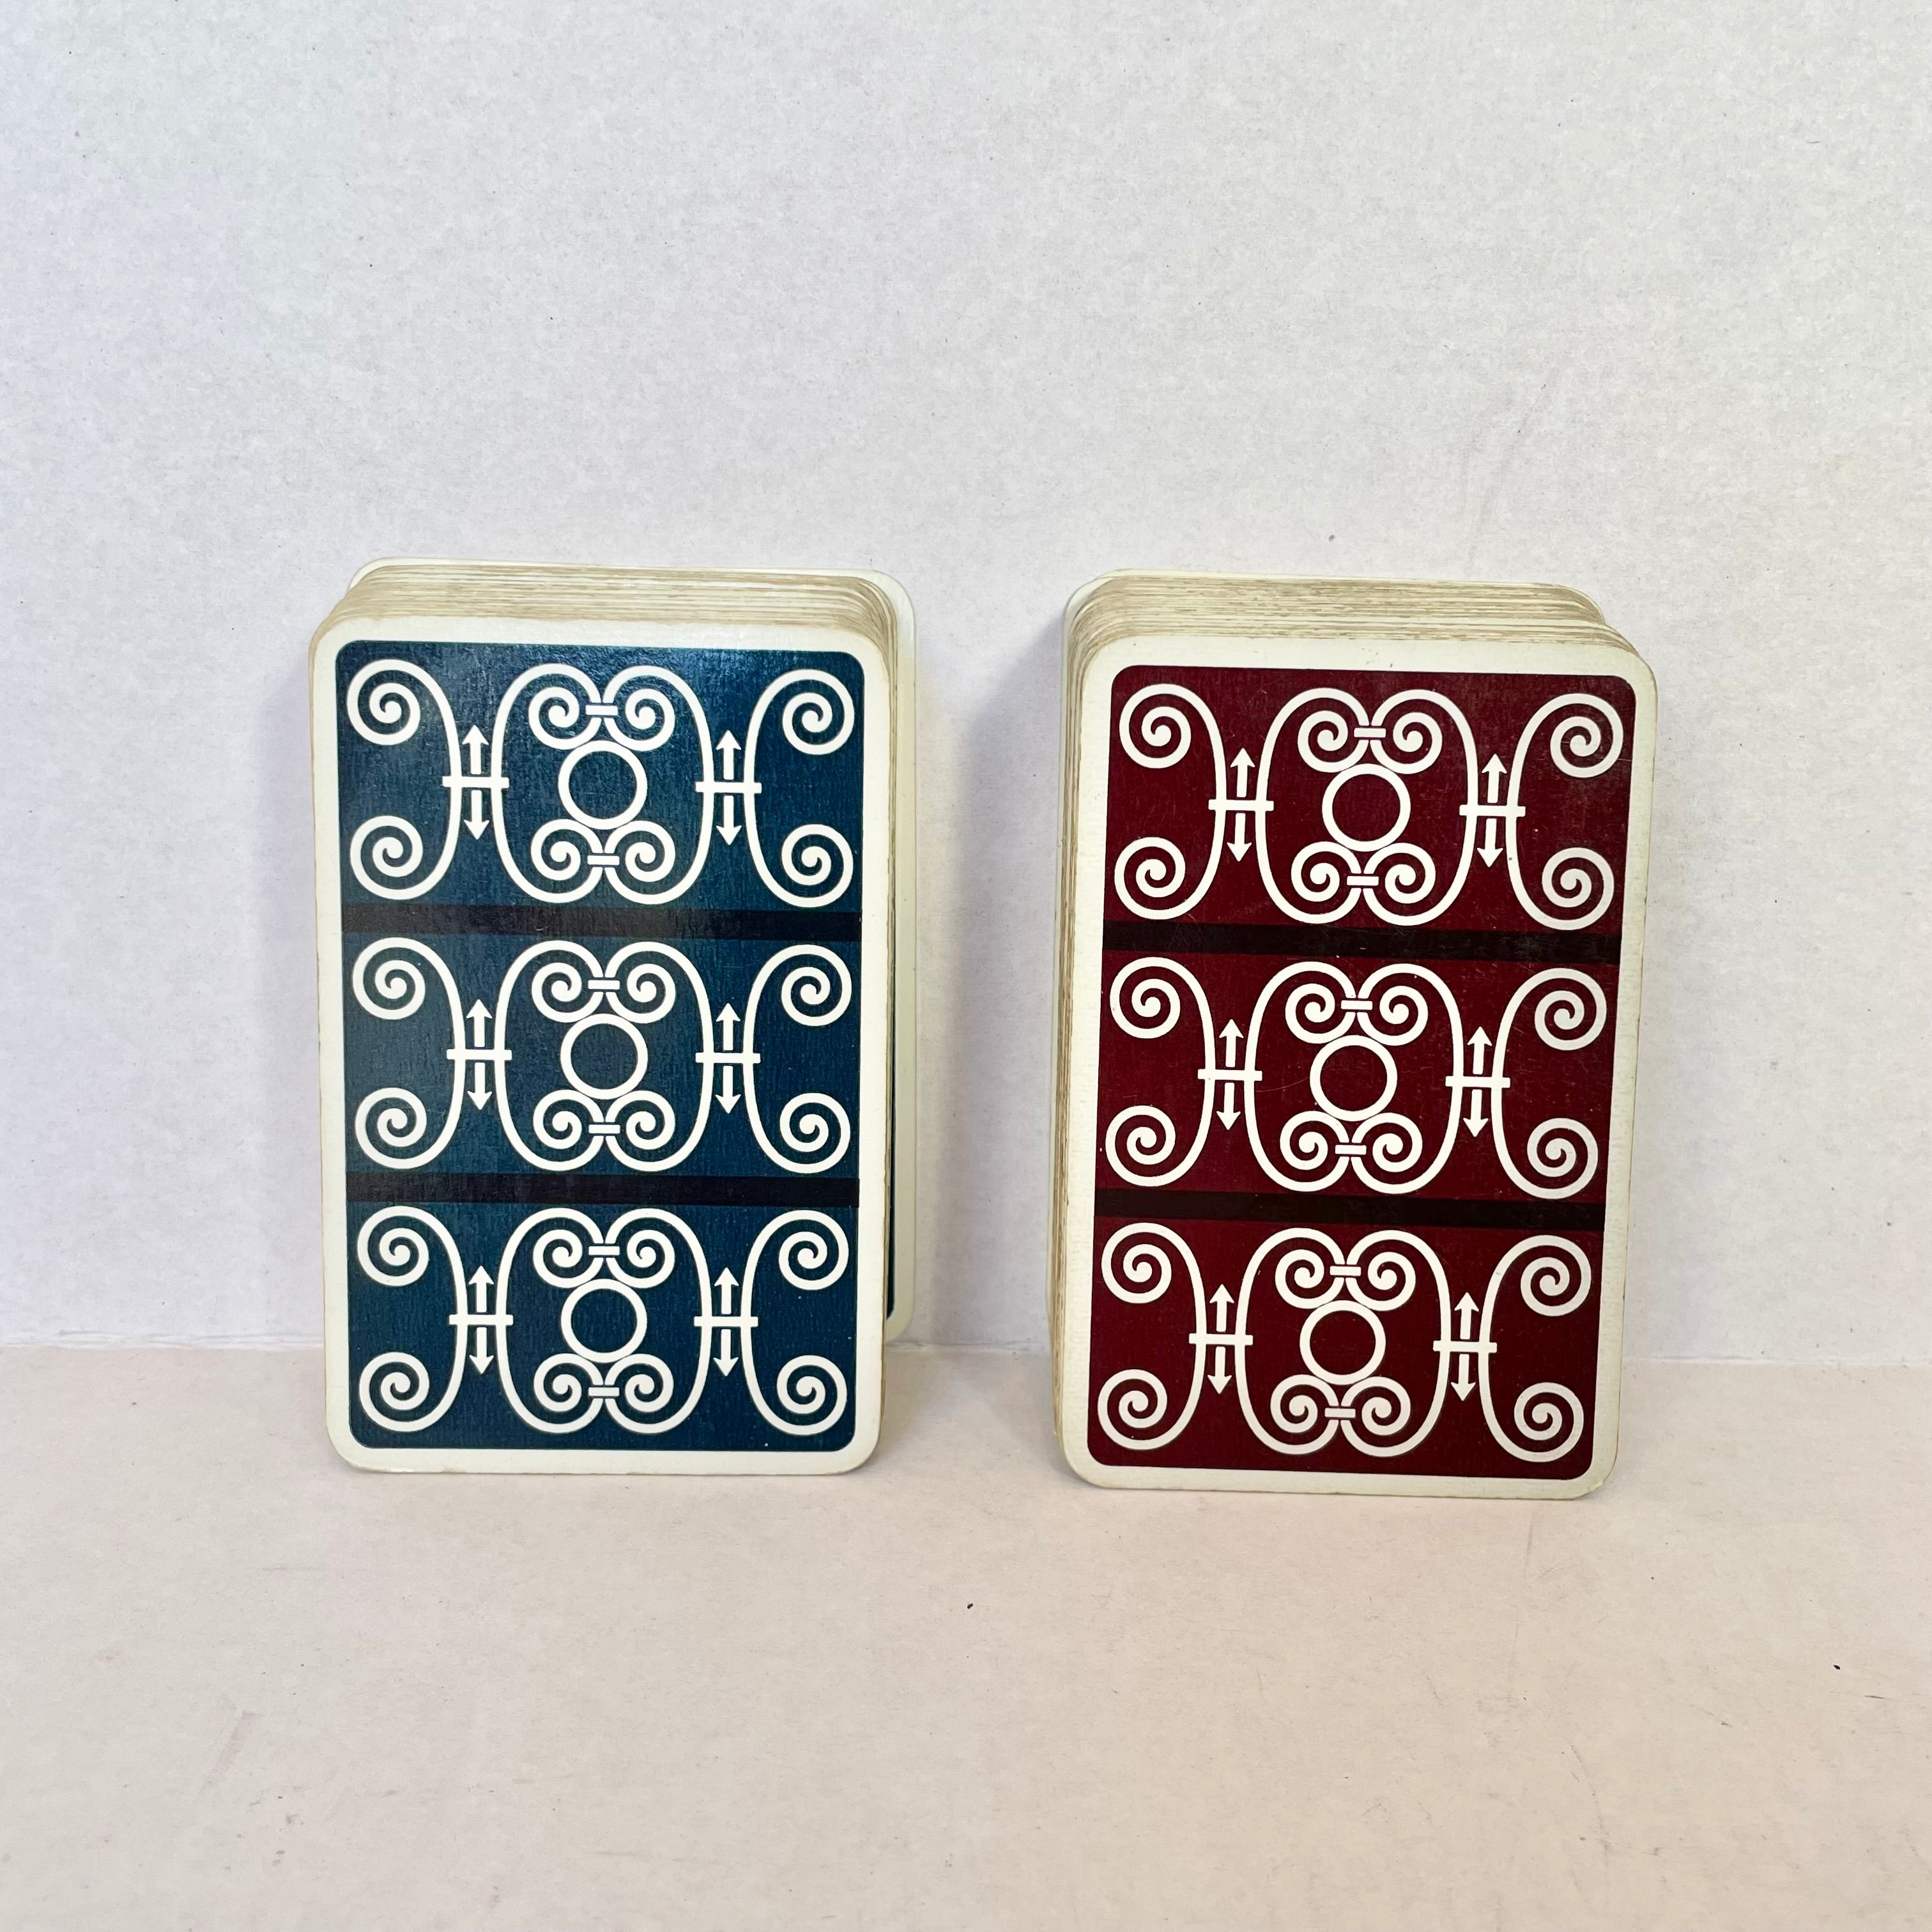 Super Rare Gilded Hermes Playing Cards Vintage for Sale in